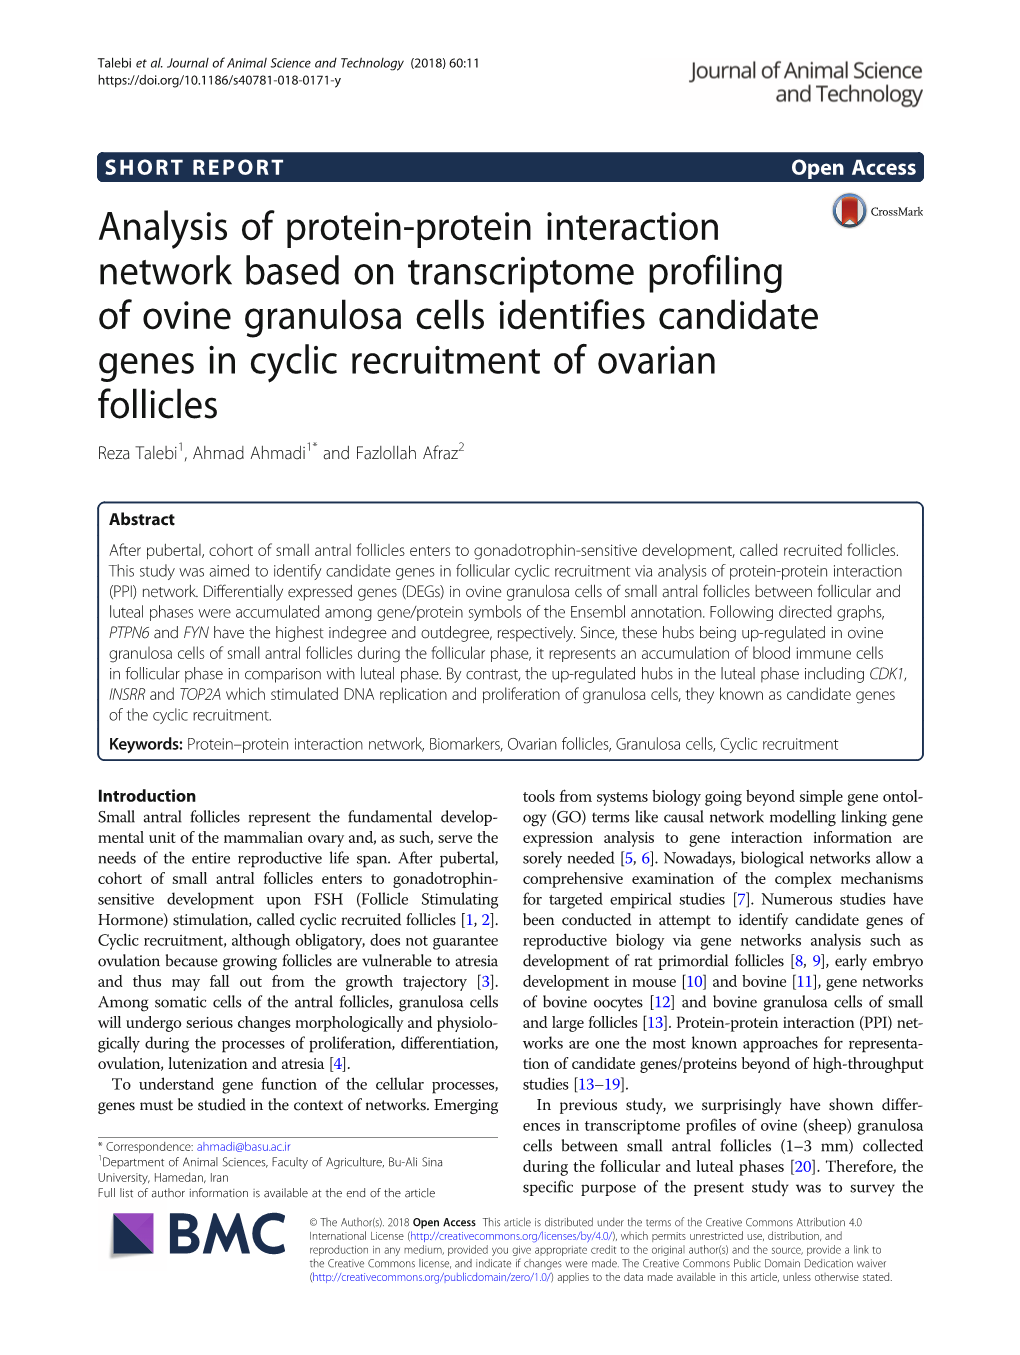 Analysis of Protein-Protein Interaction Network Based on Transcriptome